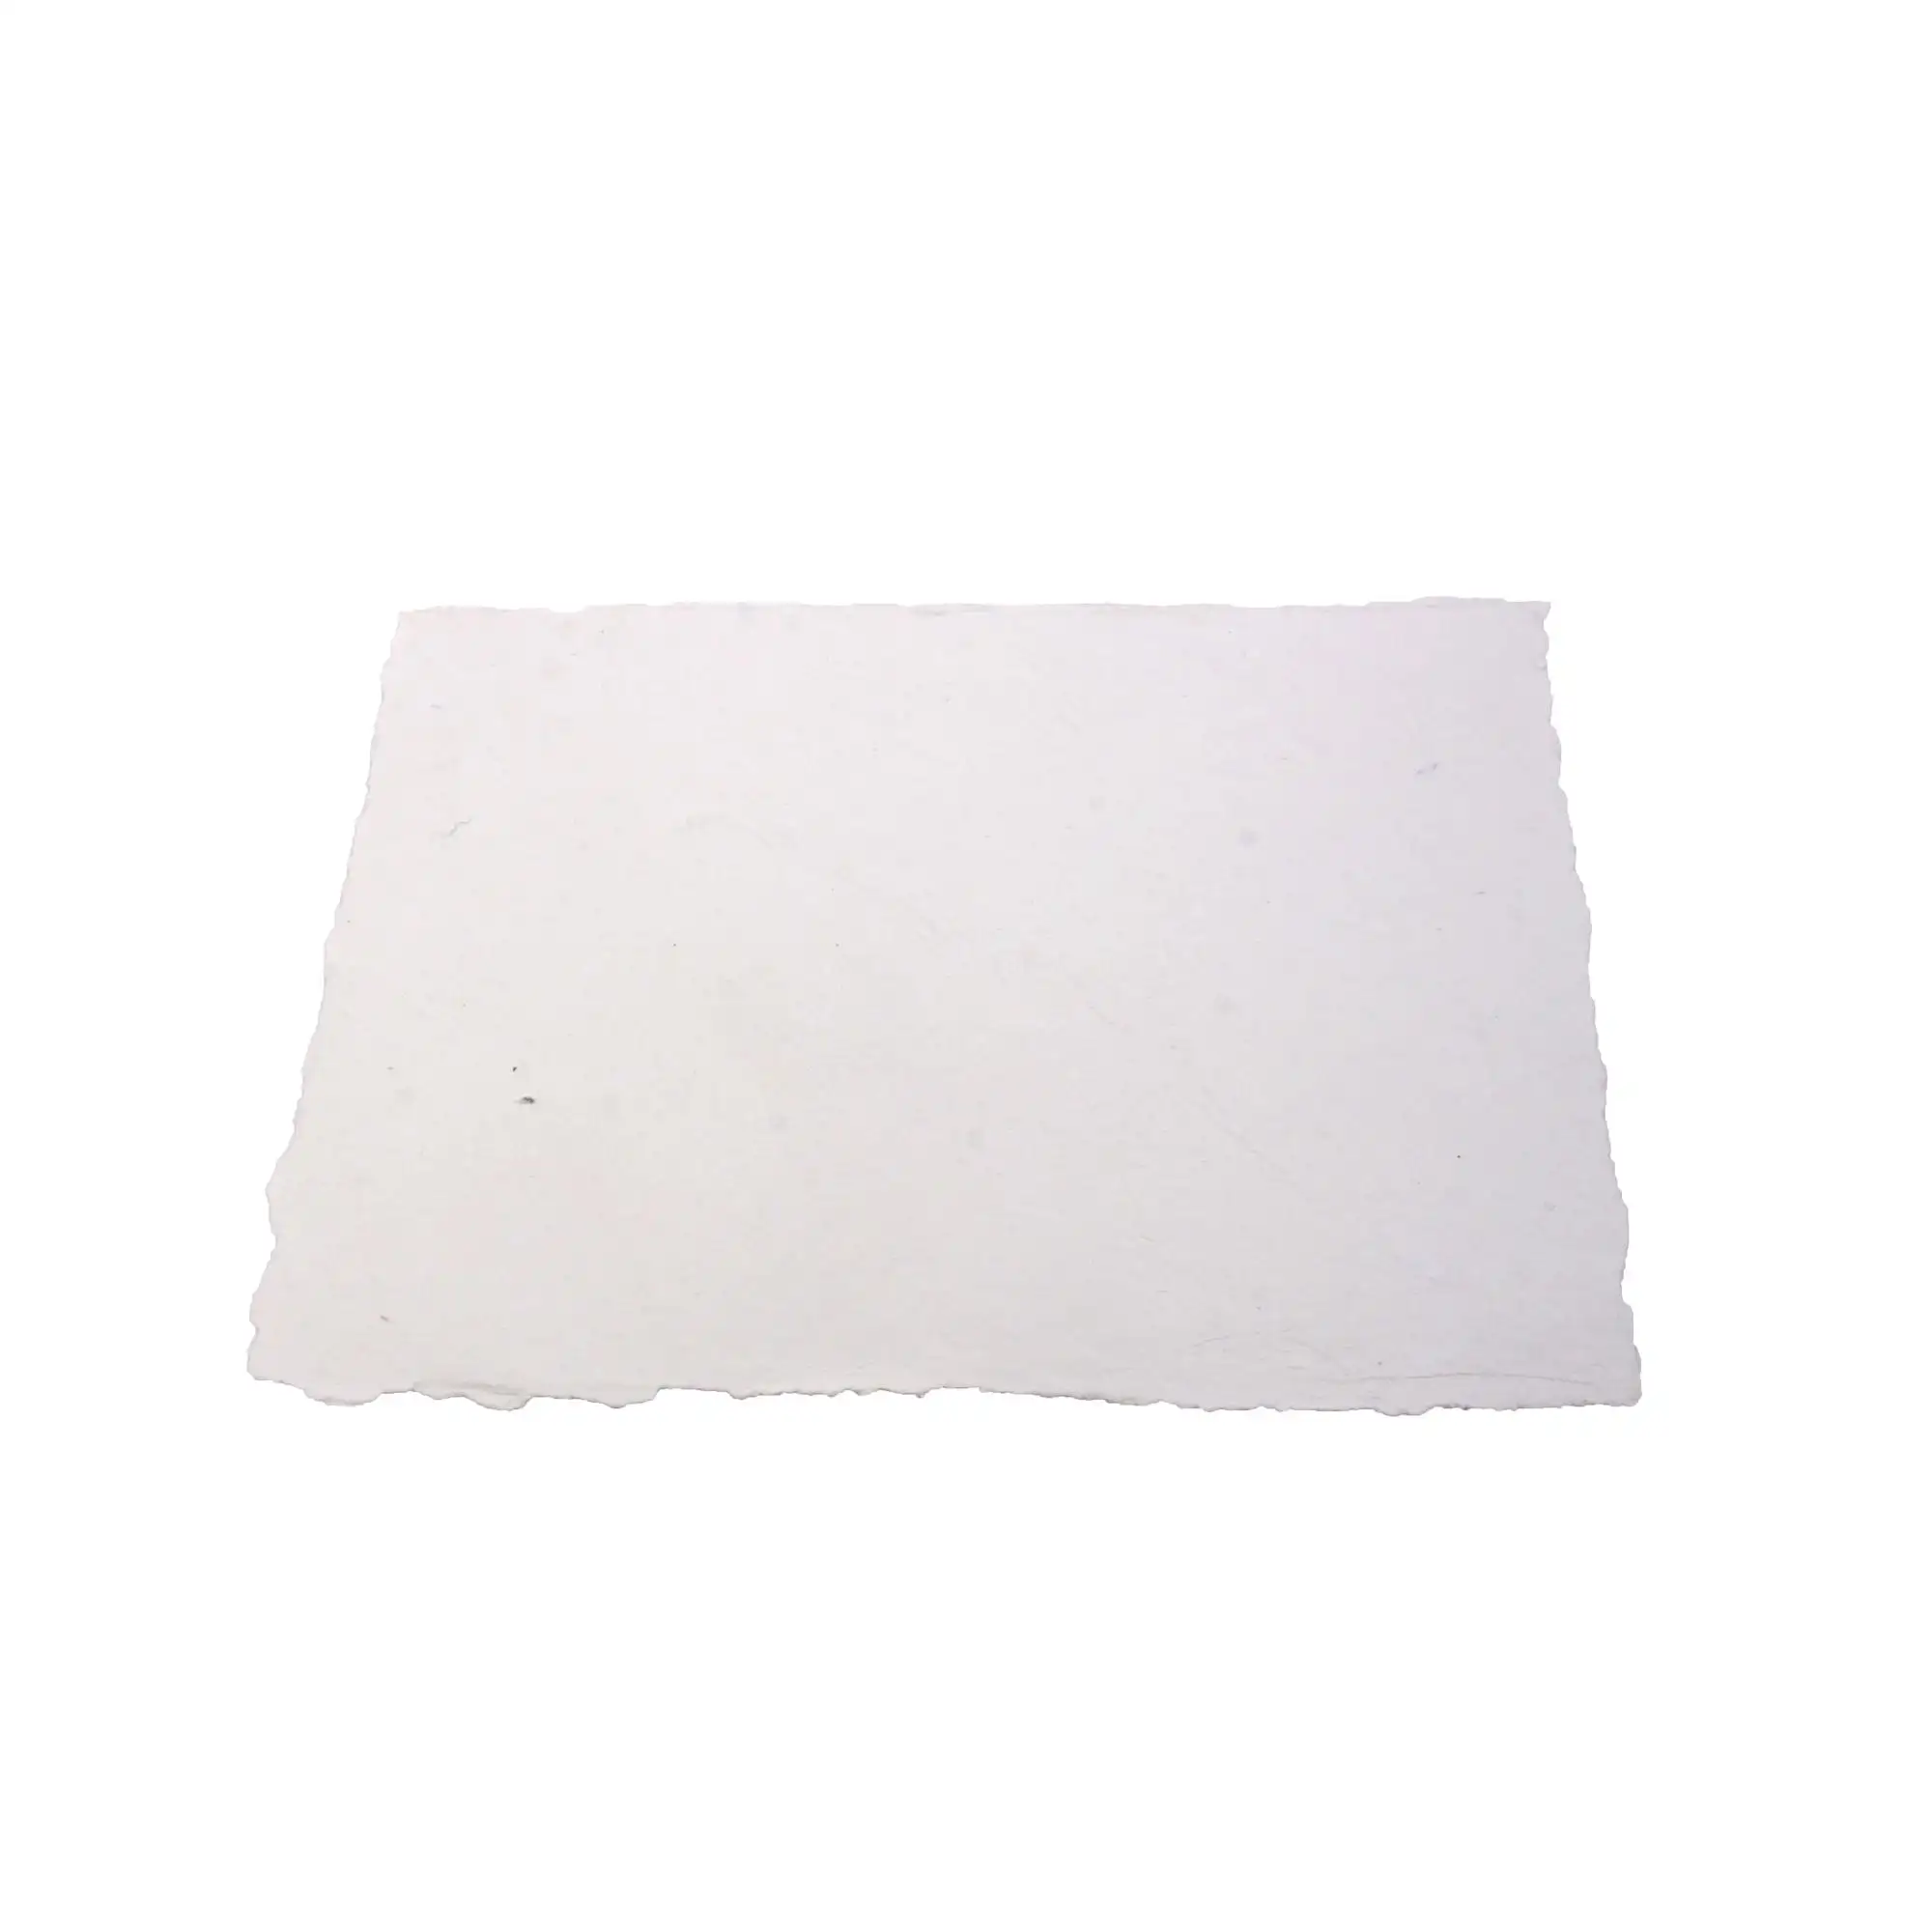 Deckle Edge Handmade Paper Blank Page for Invitation Letterpres Stationary Paper Recycled Cotton Rag White Paper with Burnt Edge